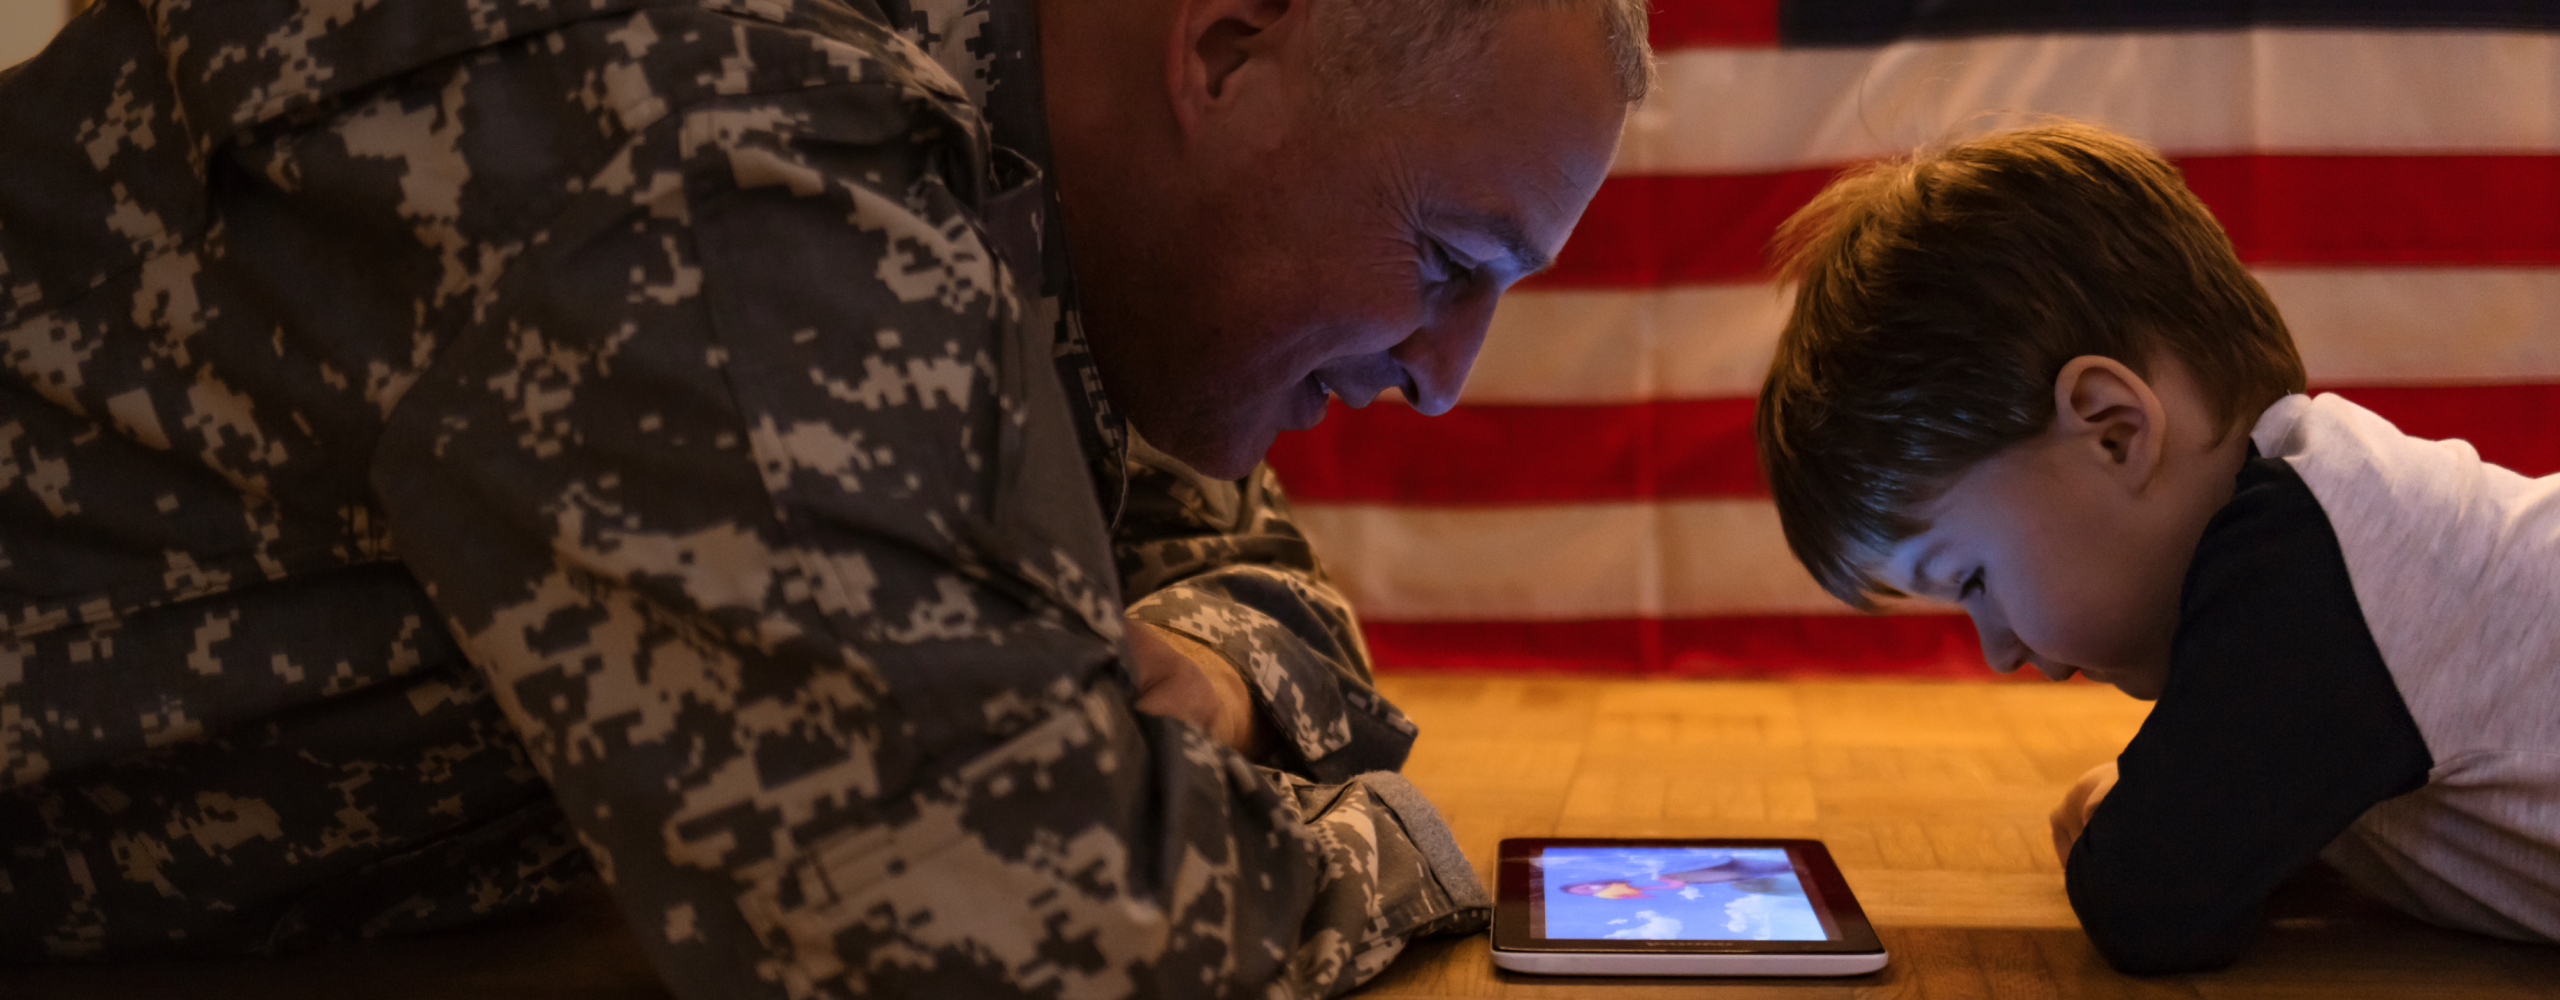 Dad in a military uniform looking at an ipad together with his son